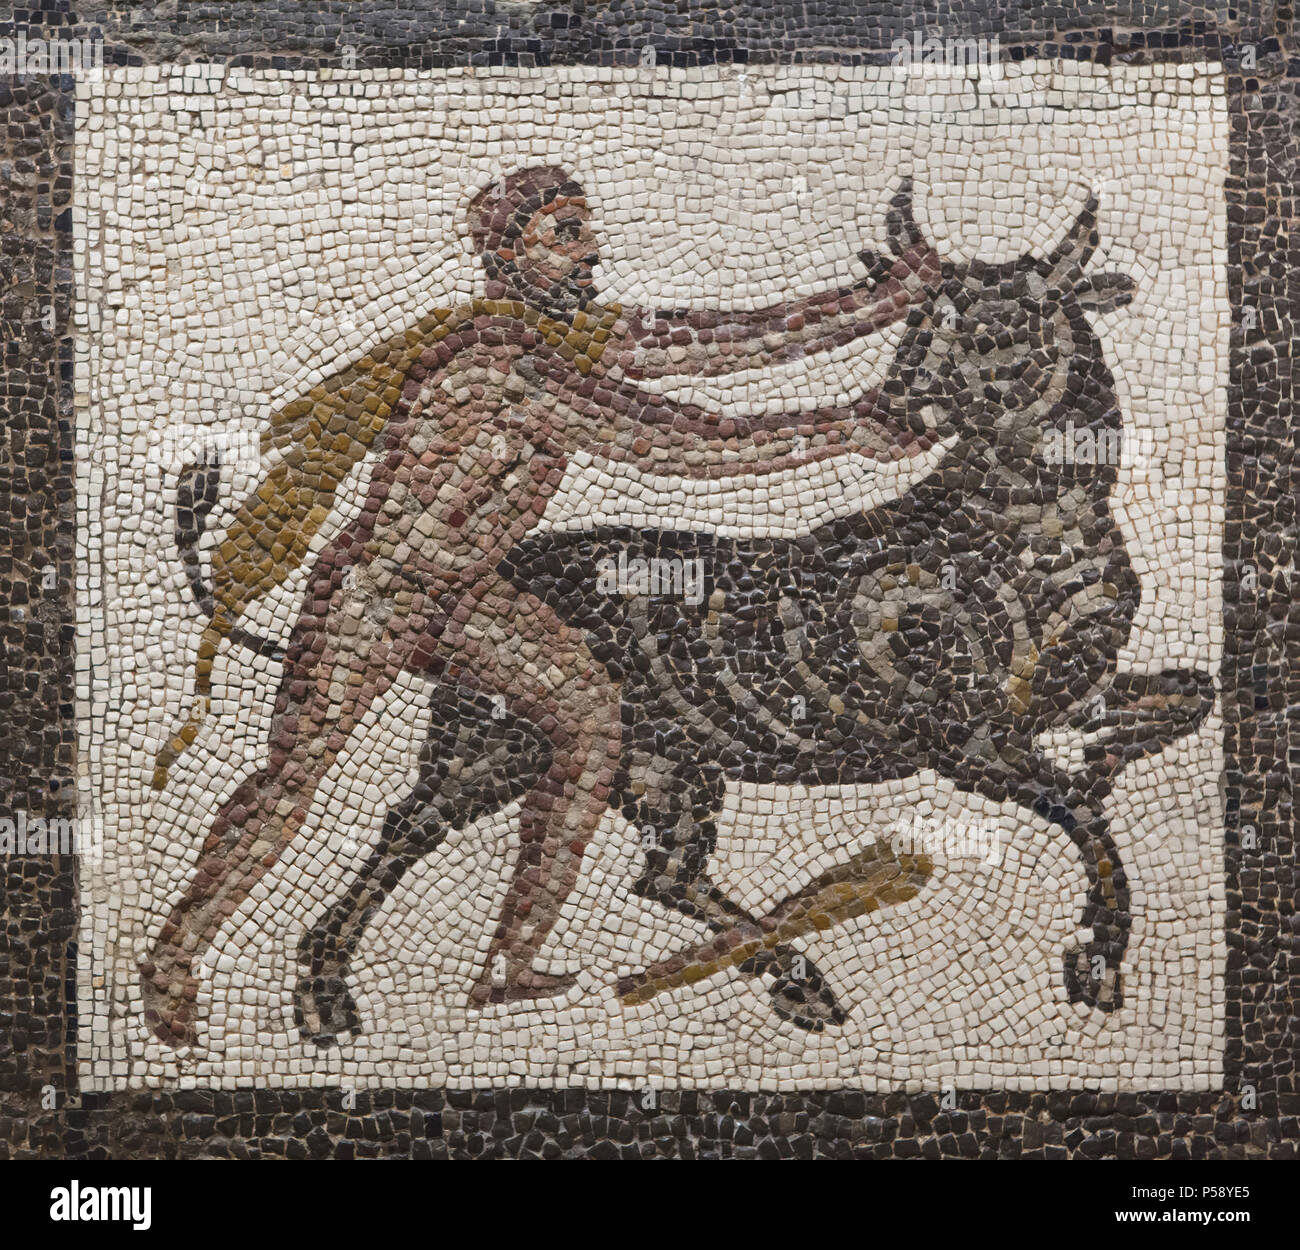 Heracles capturing the Cretan Bull. Labours of Heracles depicted in the Roman mosaic dated from the 3rd century AD from Llíria (Valencia Province, Spain) on display in the National Archaeological Museum (Museo Arqueológico Nacional) in Madrid, Spain. Stock Photo